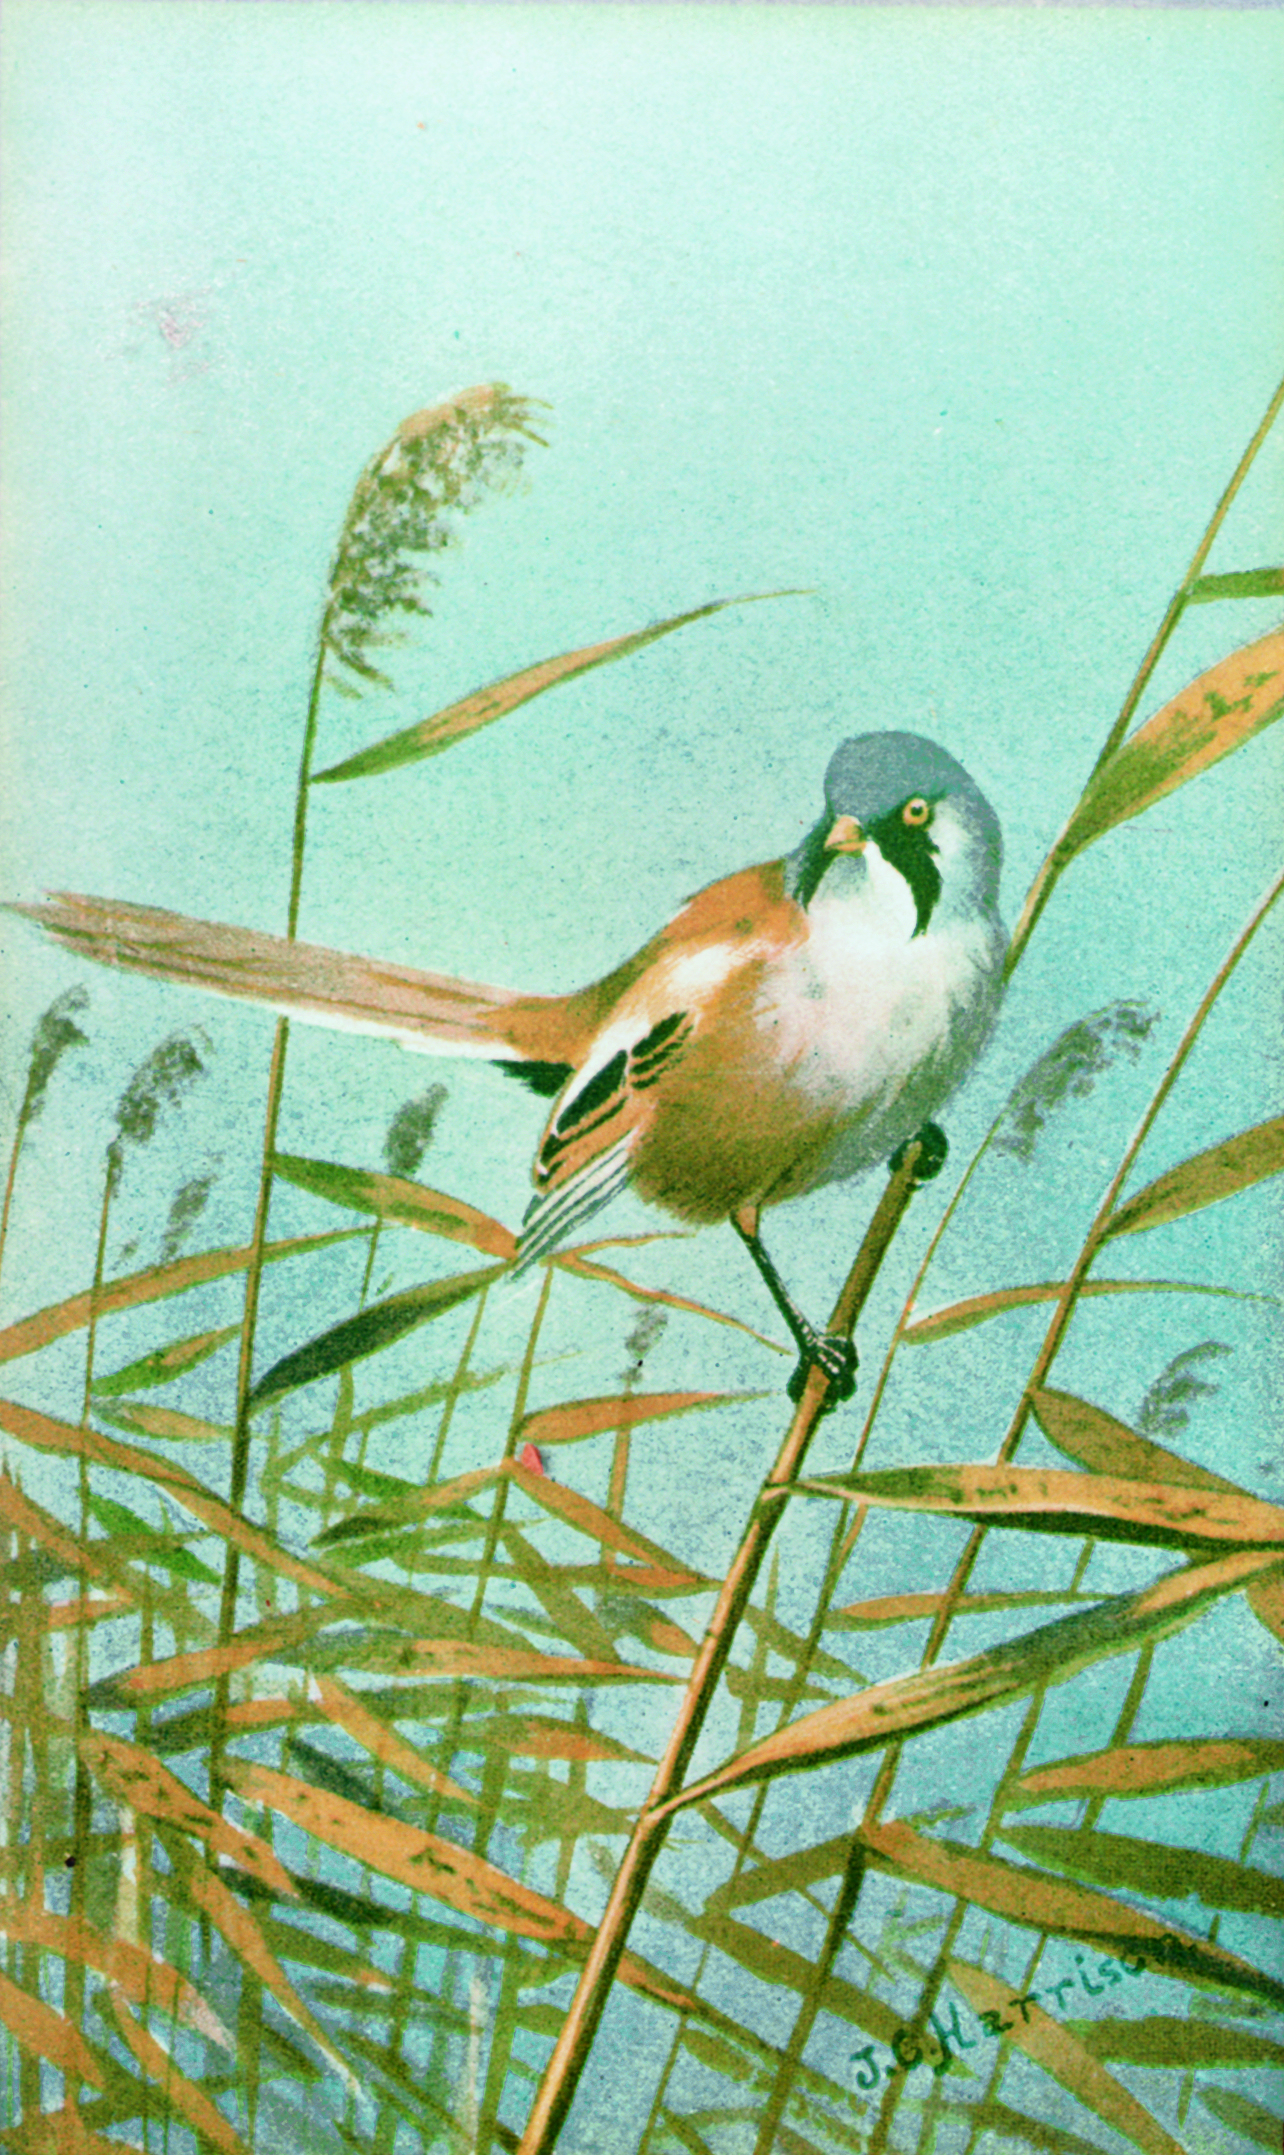 In 1930 just four years after Norfolk Naturalists Trust was founded a Christmas card was promoted to raise funds It featured a bearded tit painted by